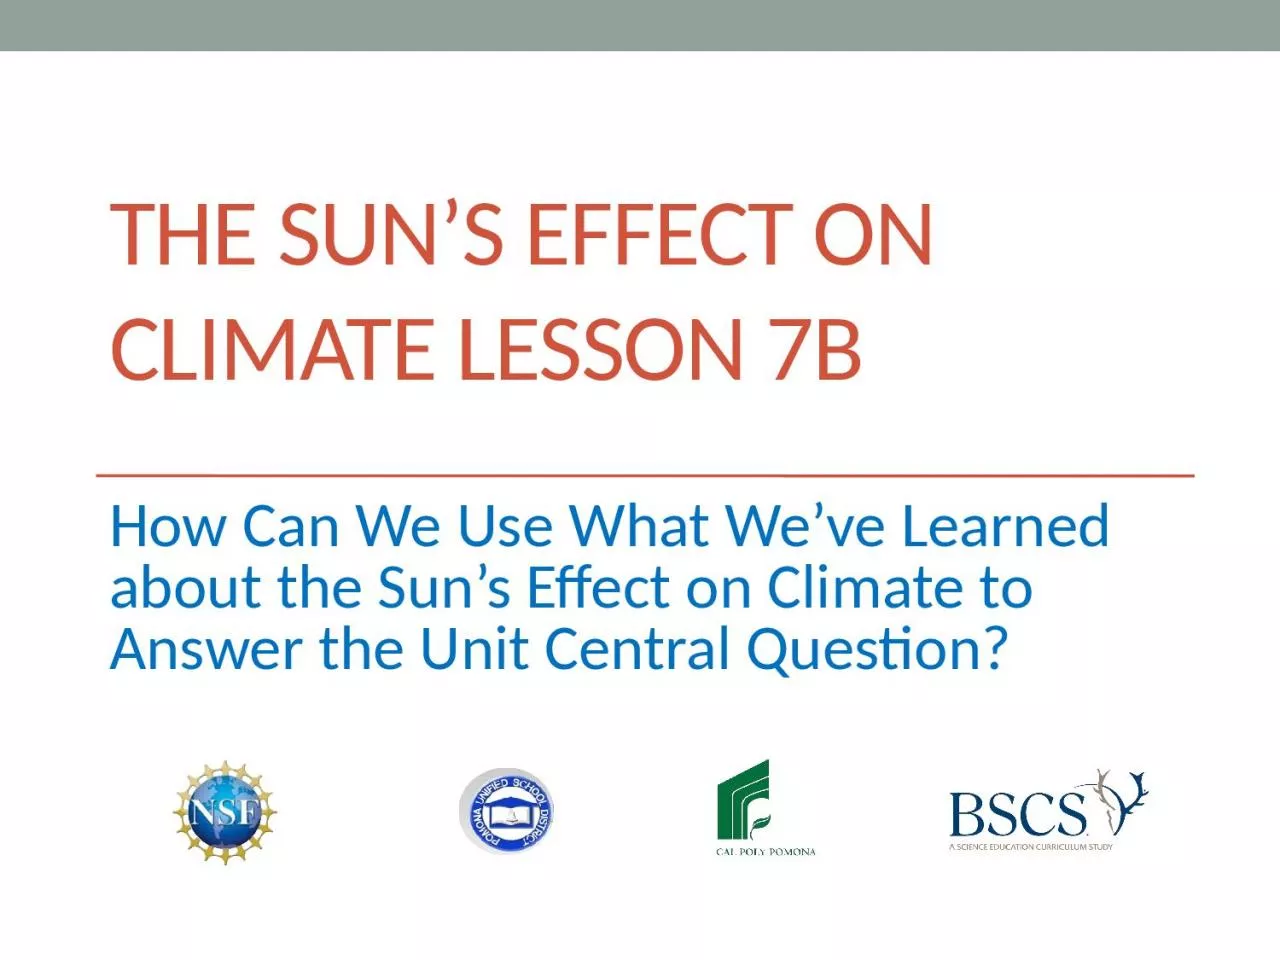 The Sun’s effect on climate Lesson 7b